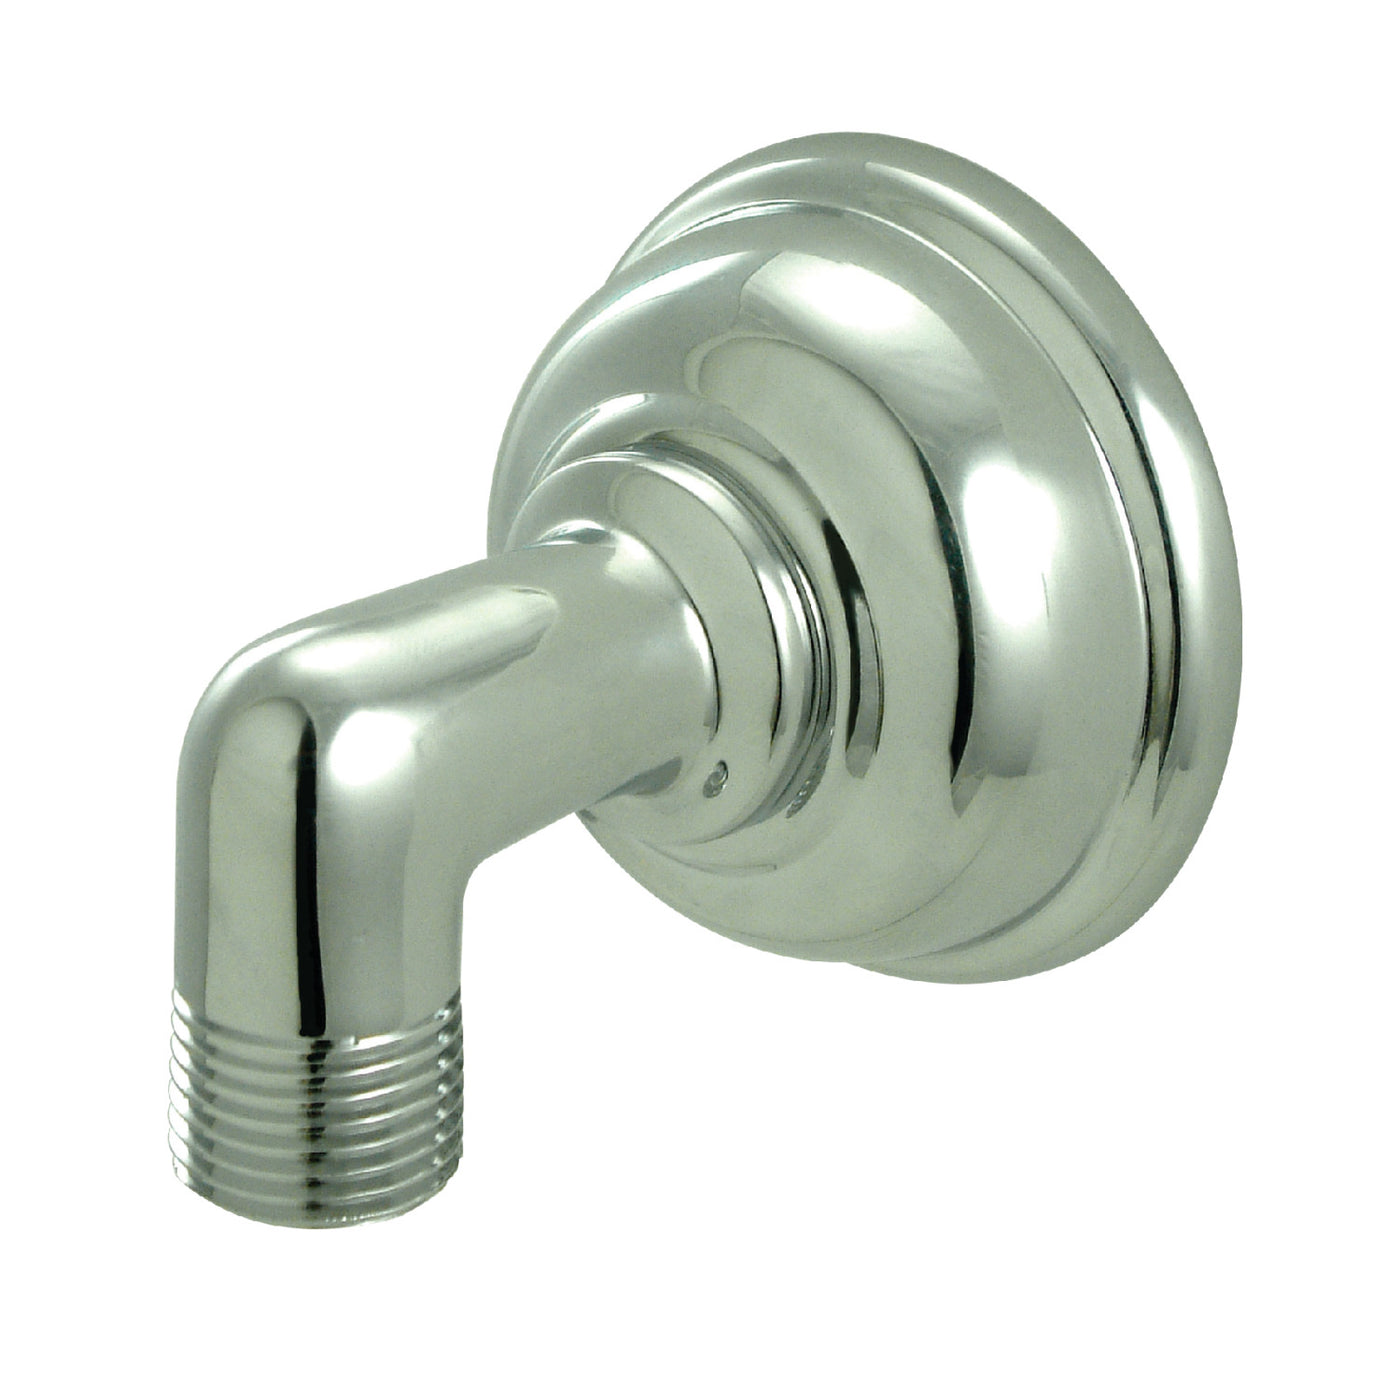 Elements of Design DK173C1 Wall Mount Supply Elbow, Polished Chrome